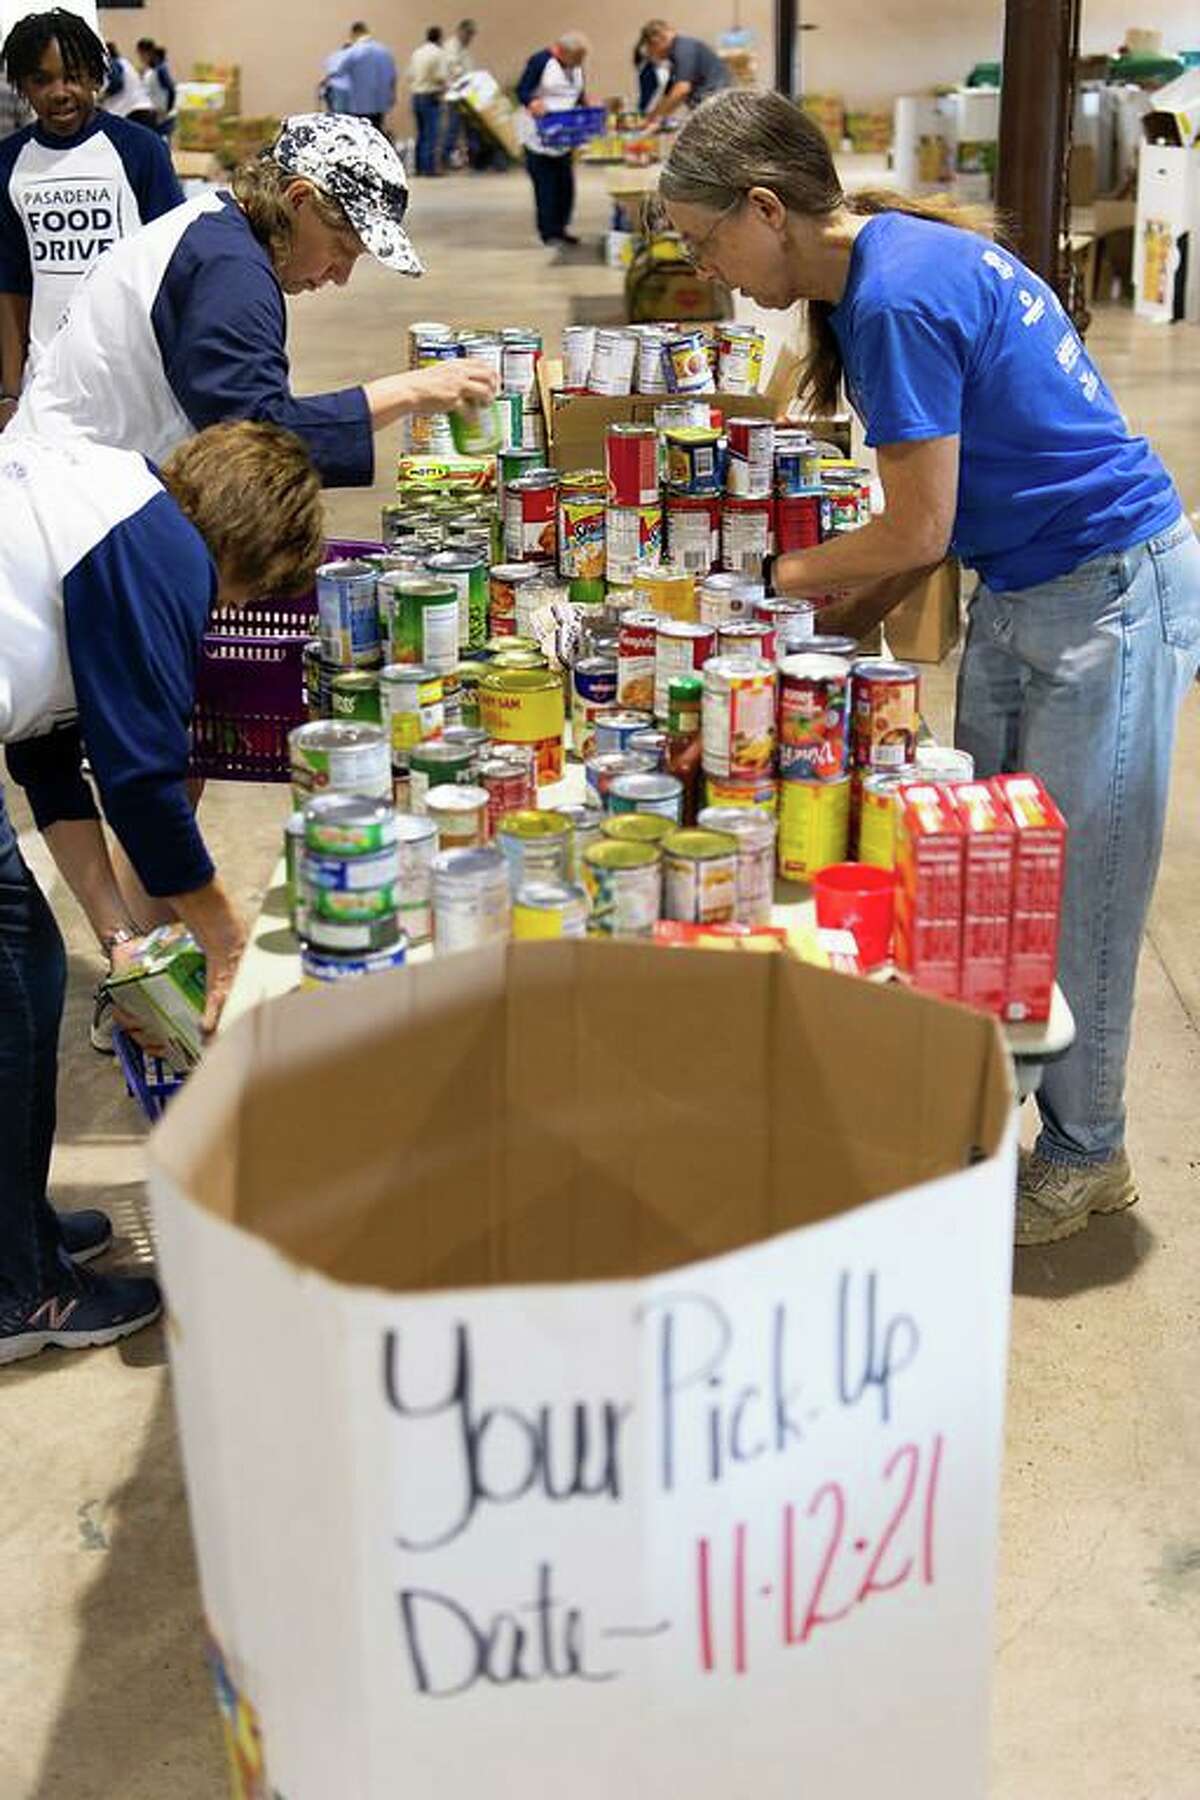 This year’s drive, held on Nov. 17 at the Pasadena Convention Center, collected approximately 83,801 pounds of food and raised nearly $24, 000.